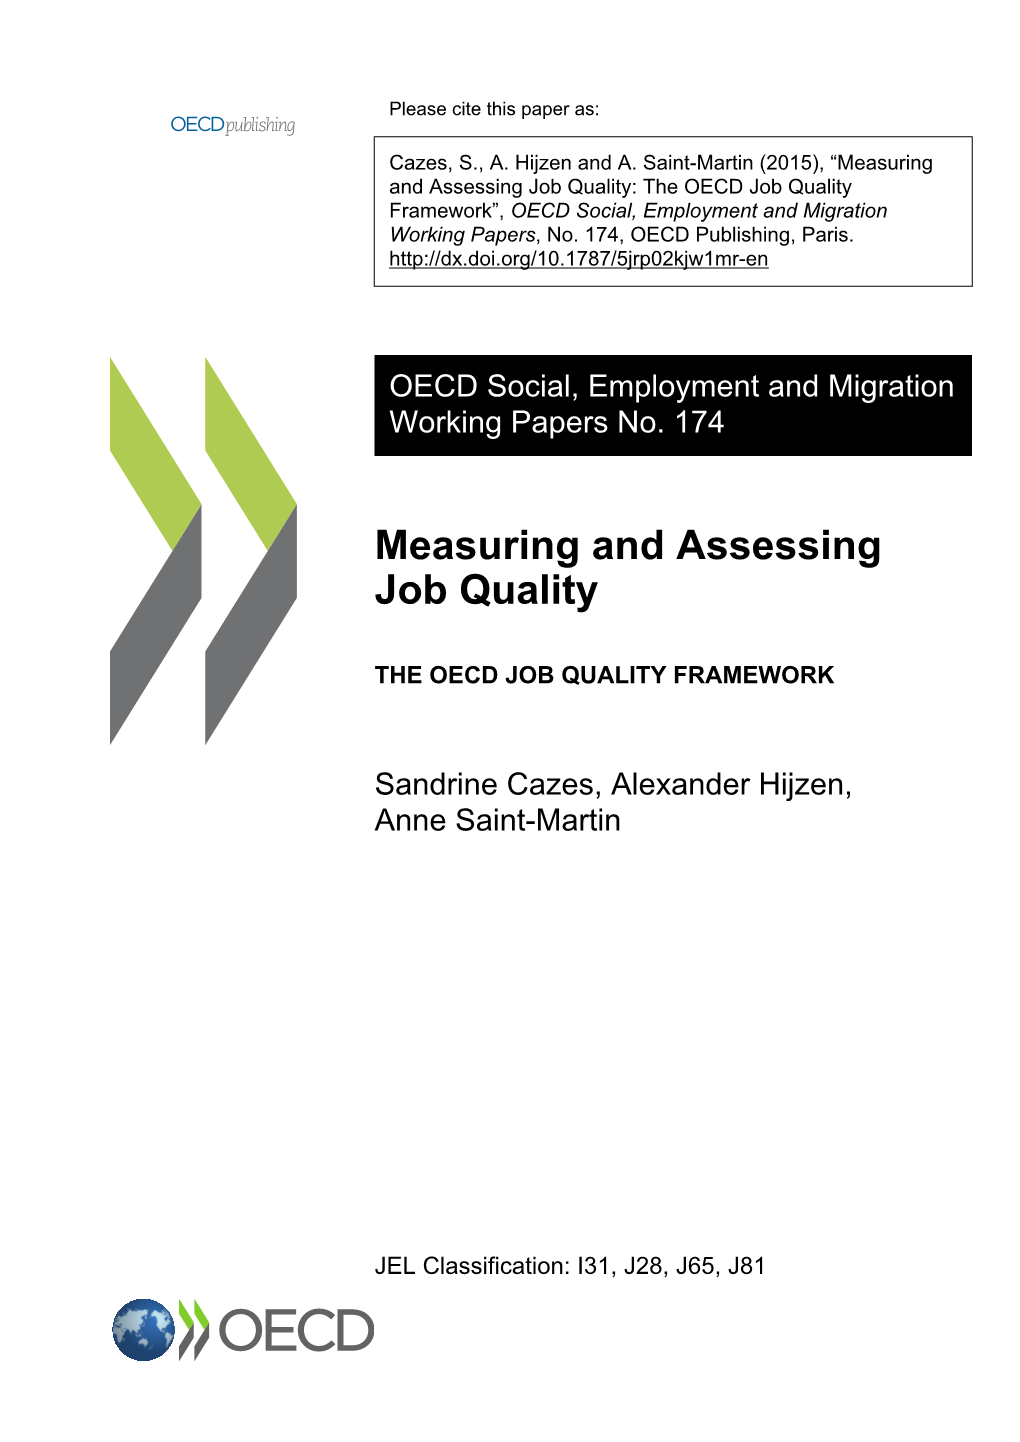 Measuring and Assessing Job Quality: the OECD Job Quality Framework”, OECD Social, Employment and Migration Working Papers, No